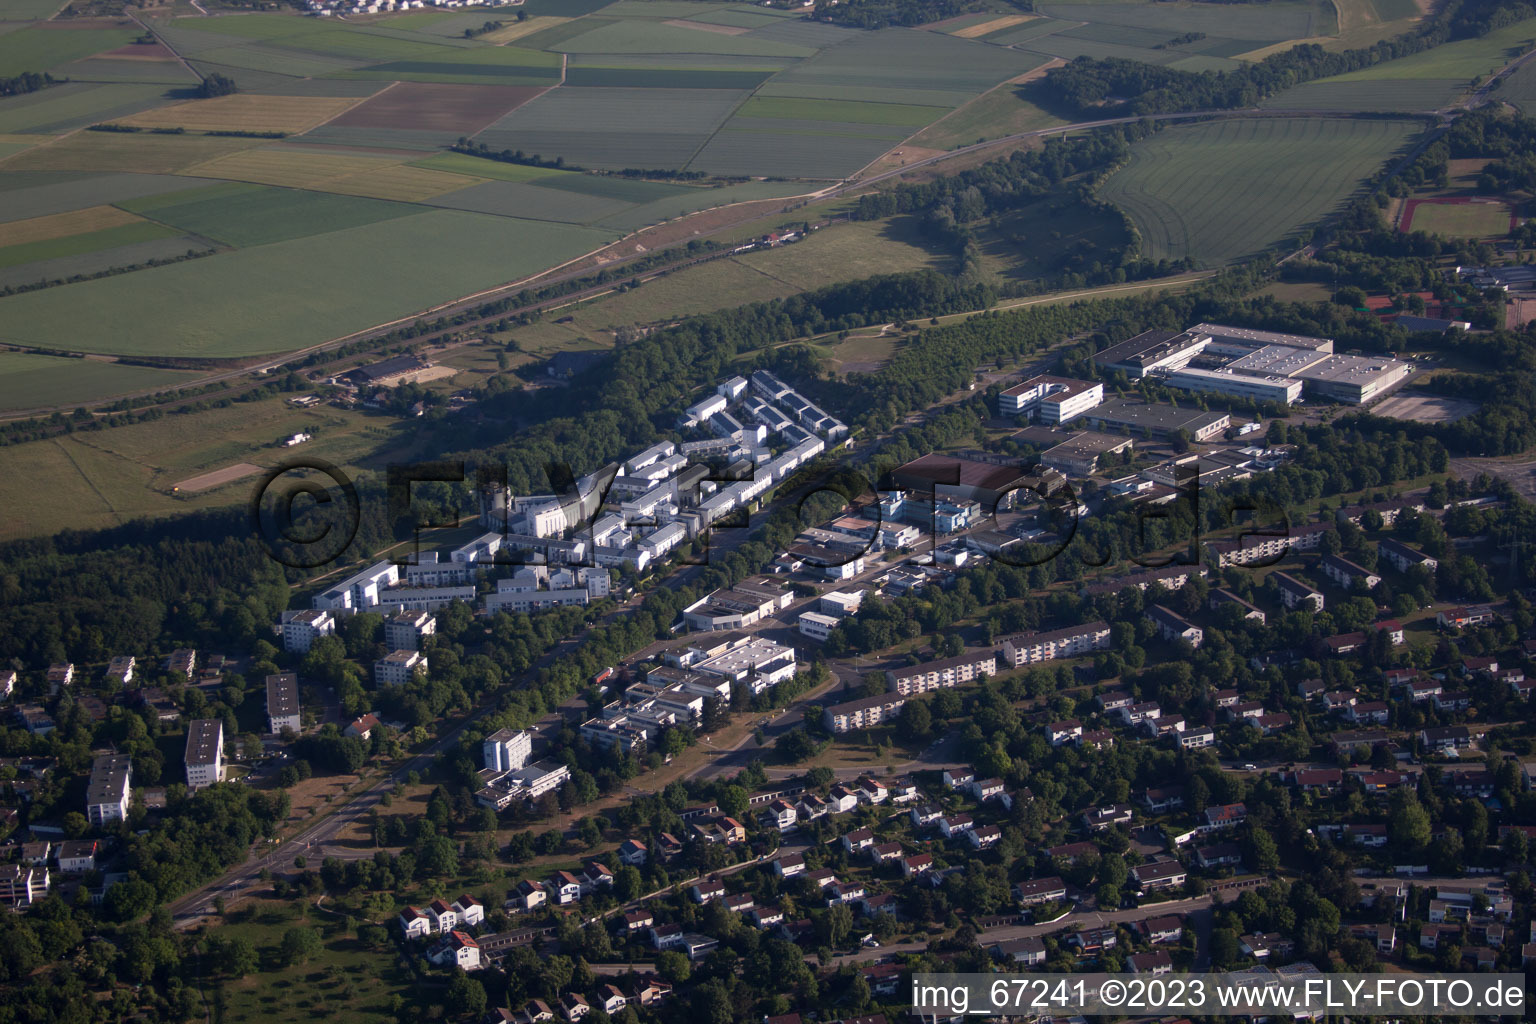 Drone image of Ulm in the state Baden-Wuerttemberg, Germany